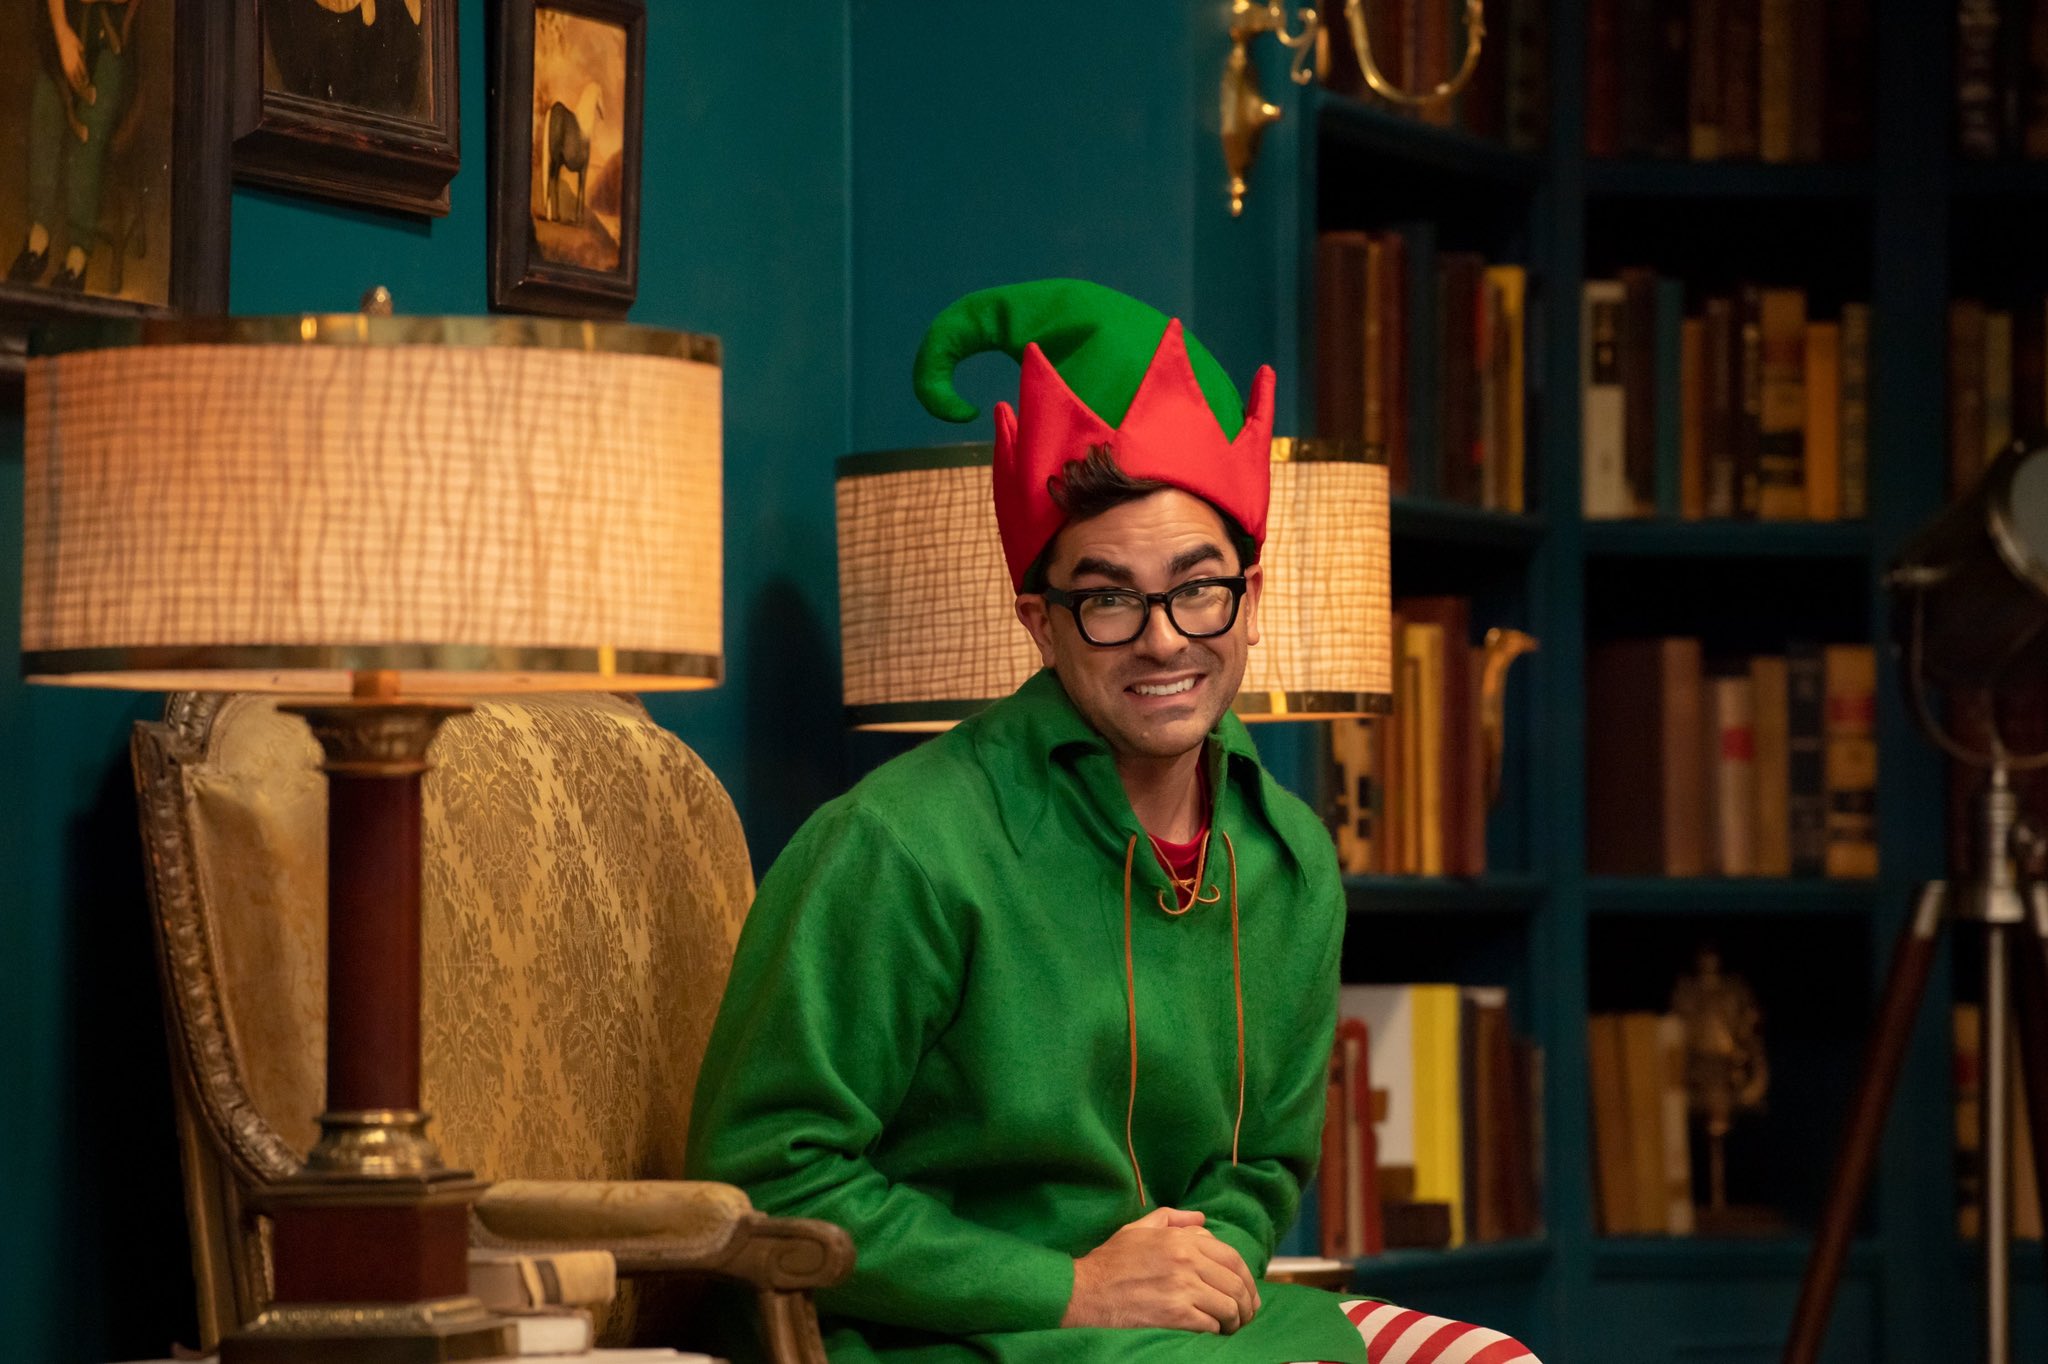 dan levy on Twitter: "Me on December 1st counting the days #2021. /